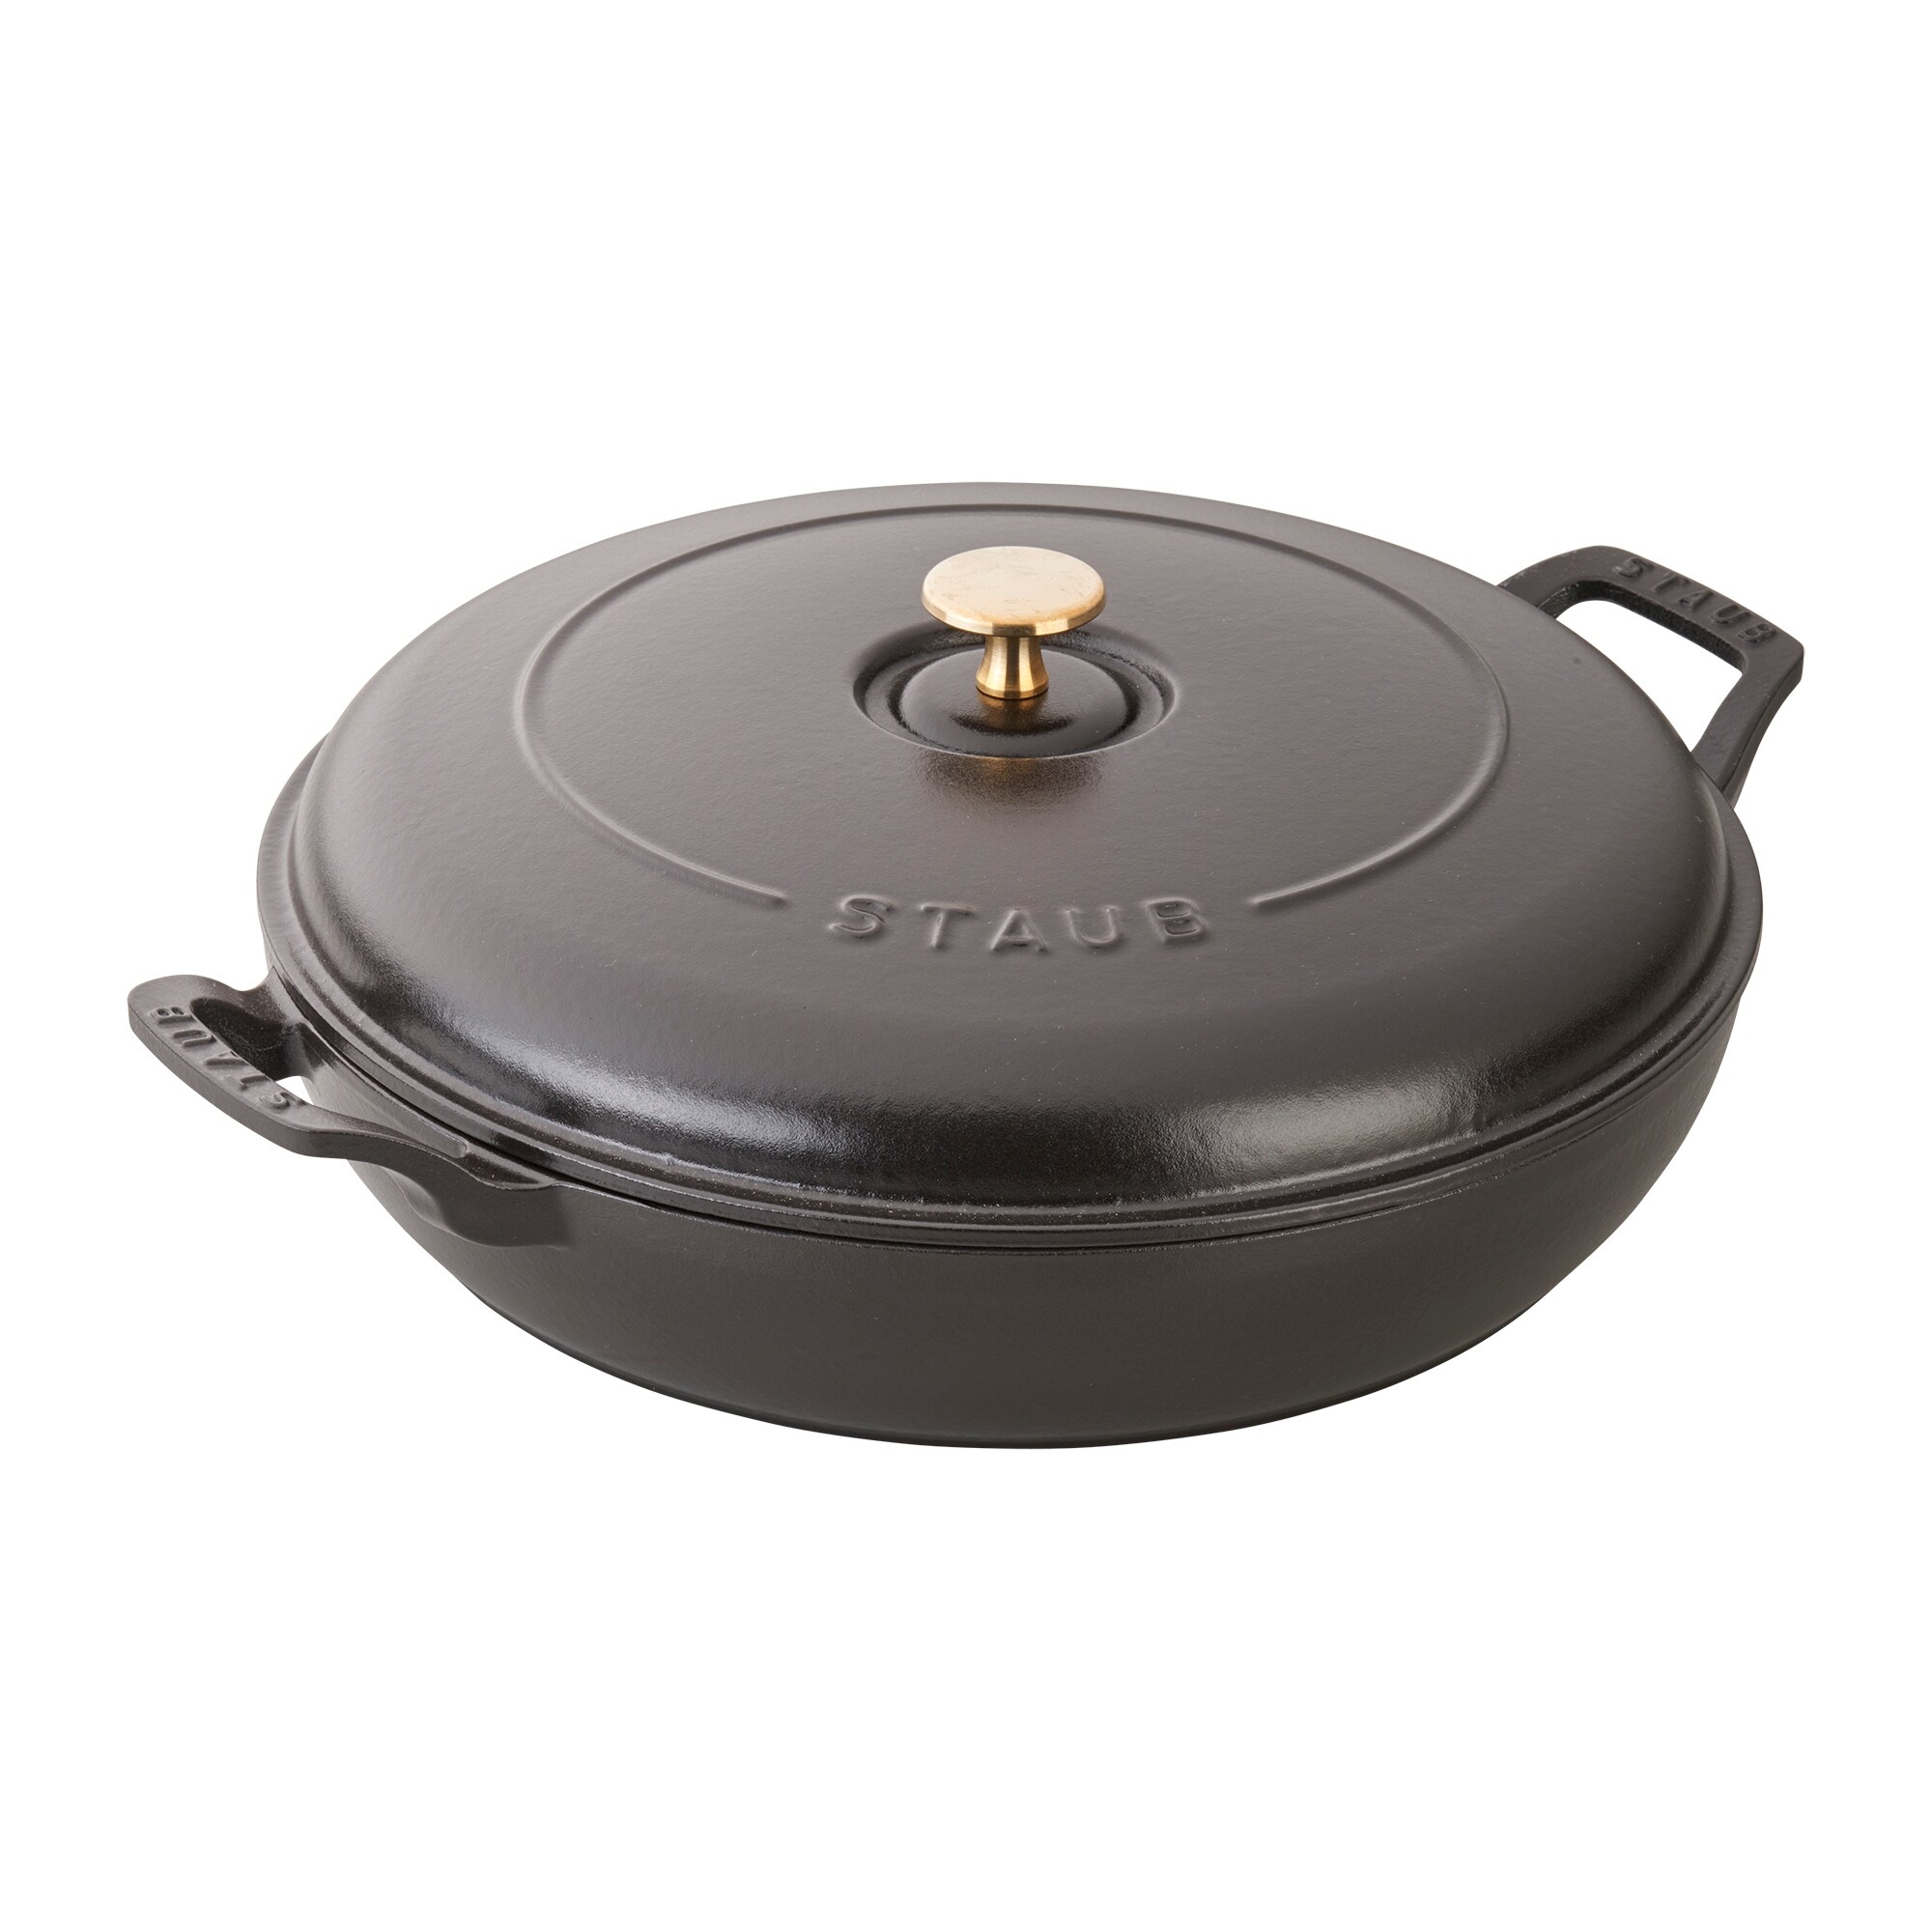 https://ak1.ostkcdn.com/images/products/is/images/direct/a3a4e95843f1c738c036b675d2587e1febd3331d/Staub-Cast-Iron-3.5-qt-Braiser.jpg